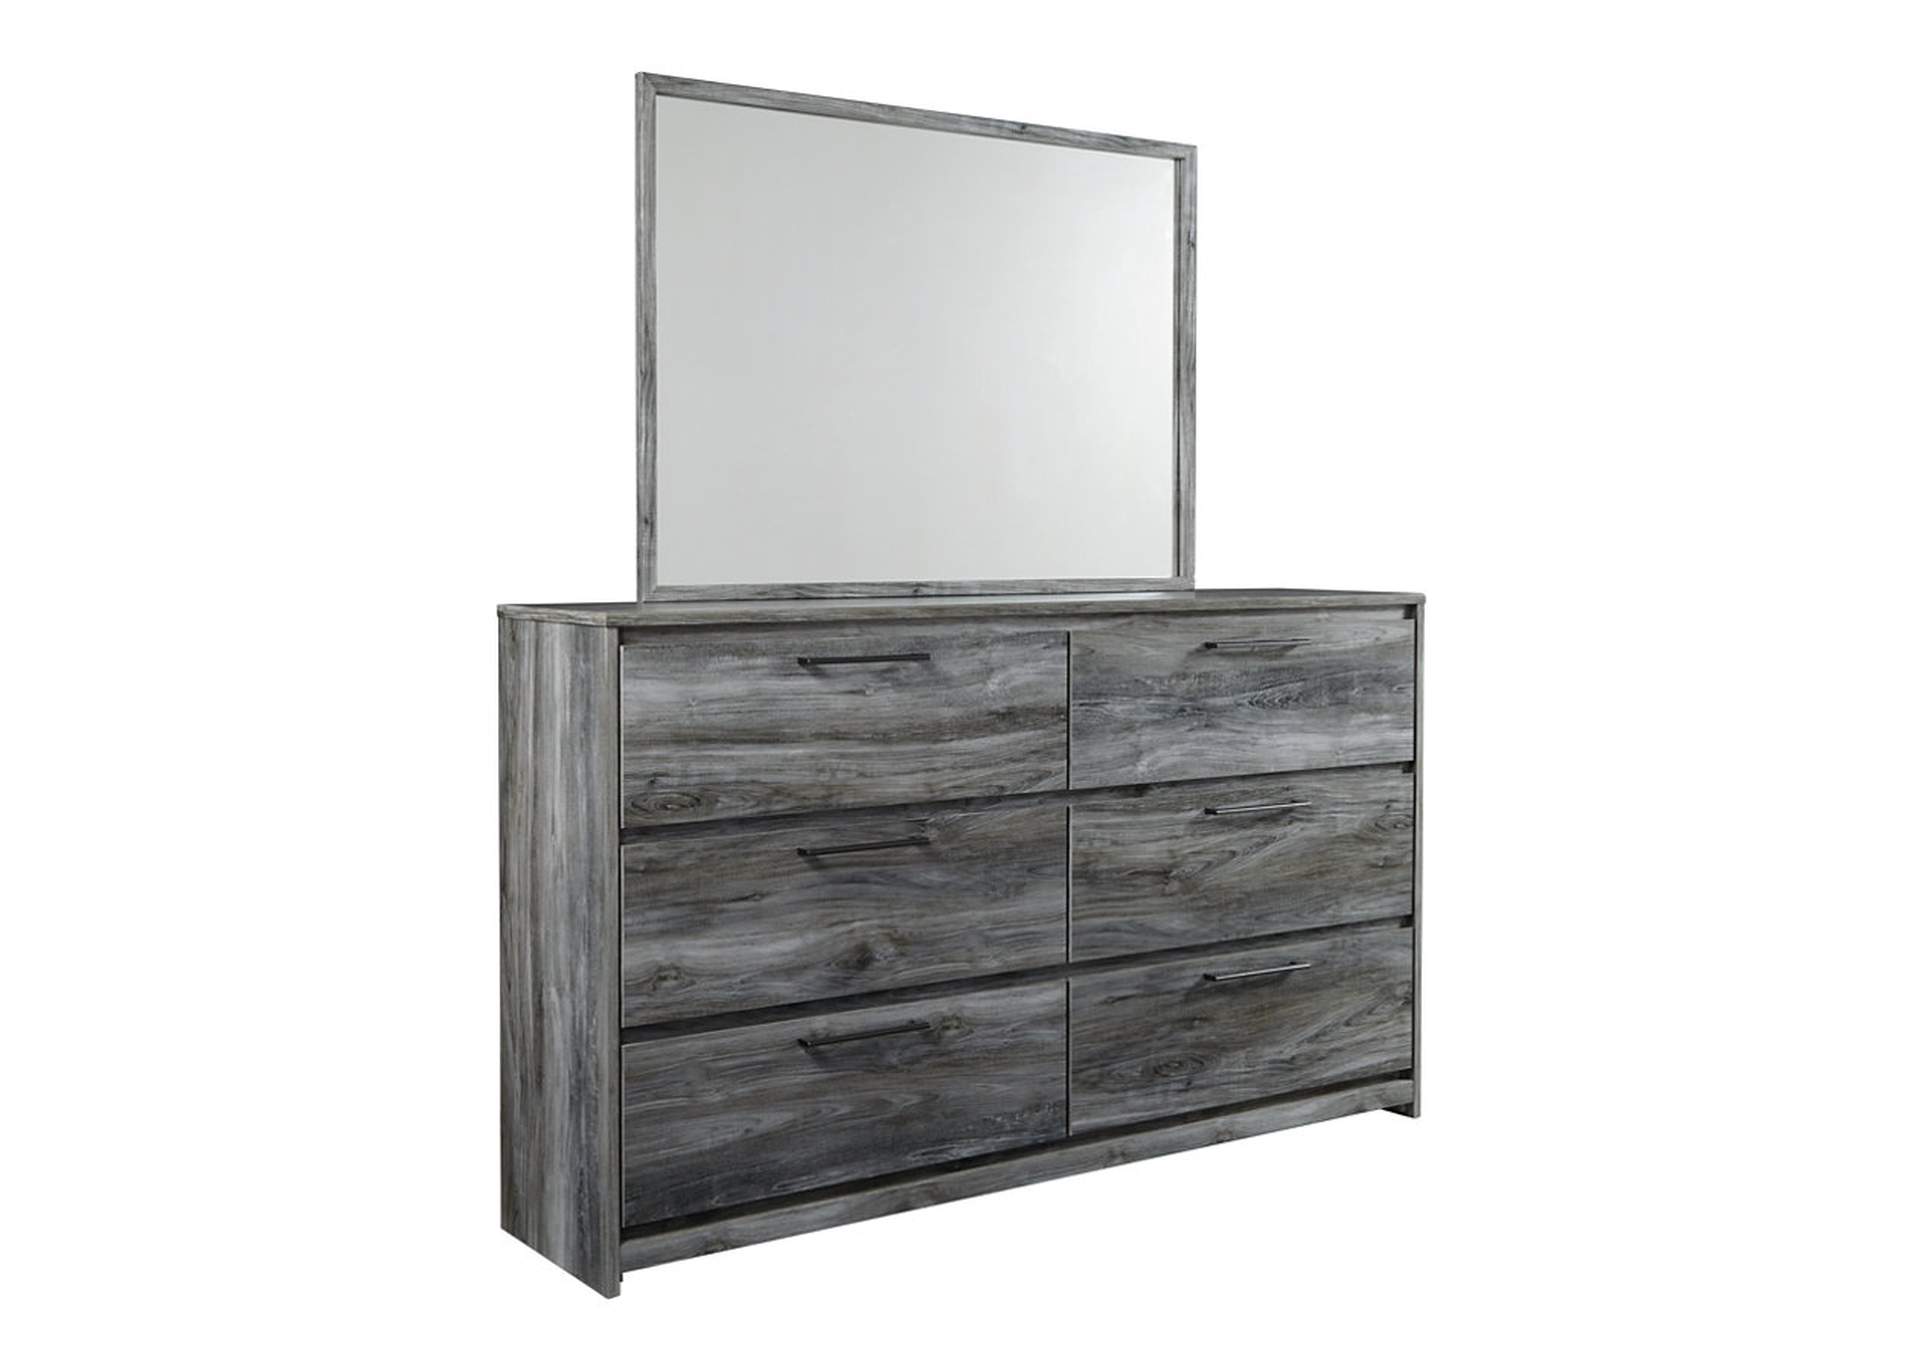 Baystorm Twin Panel Bed Headboard, Dresser, Mirror and Nightstand,Signature Design By Ashley